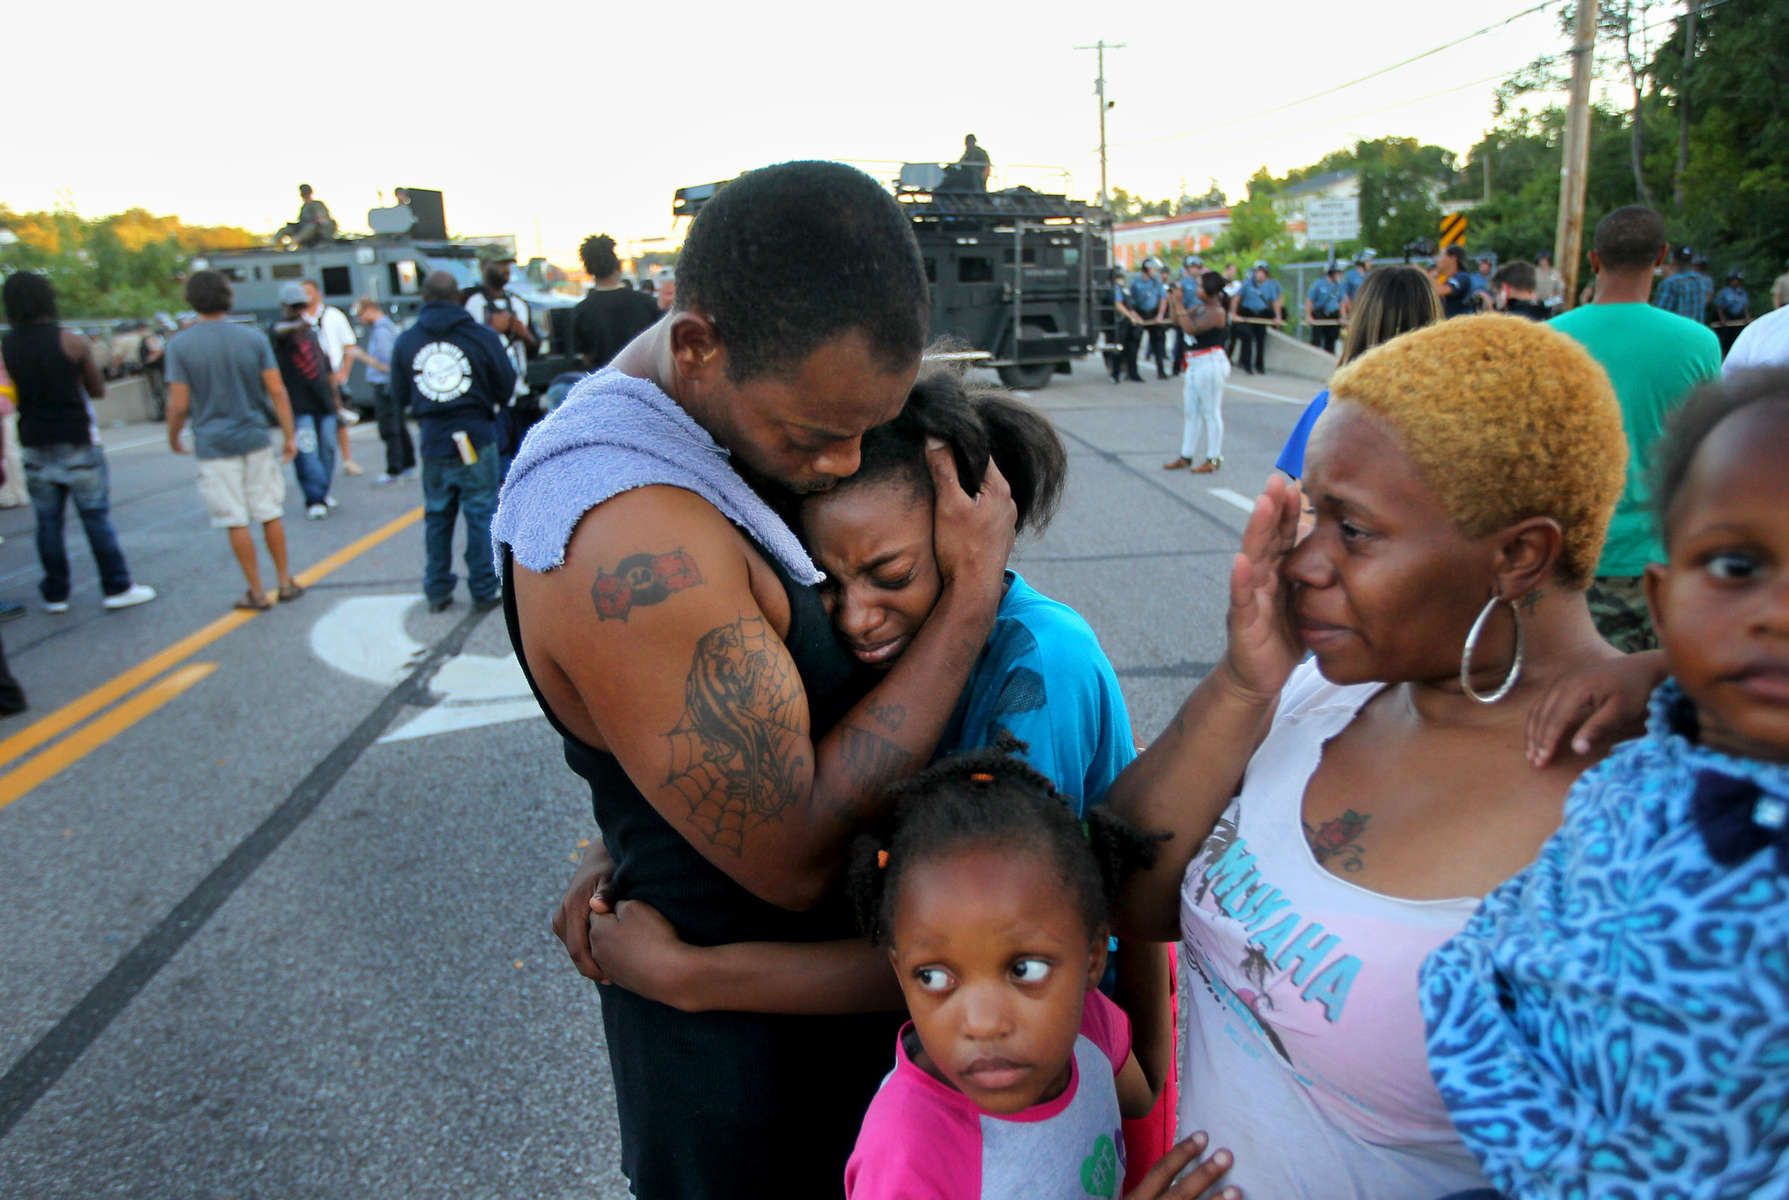 Terrell Williams El, comforts his daughter Sharell Williams, 9, as Temika Williams, 6, (bottom) stays close to her mom Shamika Williams, and sister Shanell Williams, 2, near a line of police in riot gear on West Florissant Ave. on Wednesday, Aug. 13, 2014.  